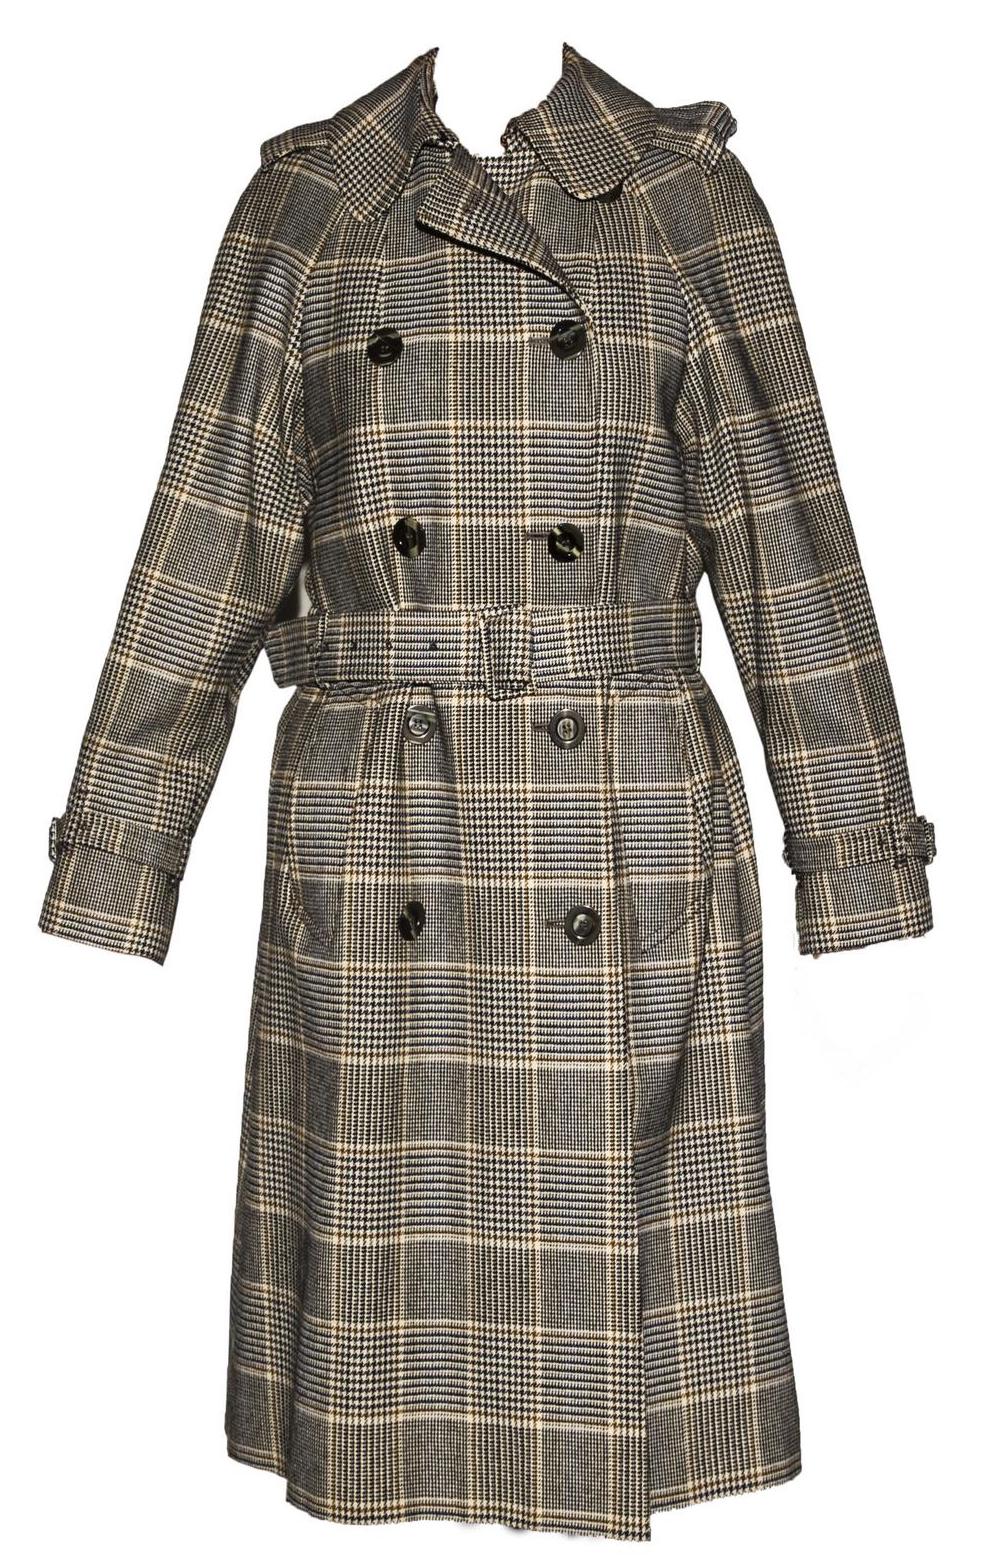 Aquascutum TRENCH COAT Description: Trench coat in tweed wool with Prince of...